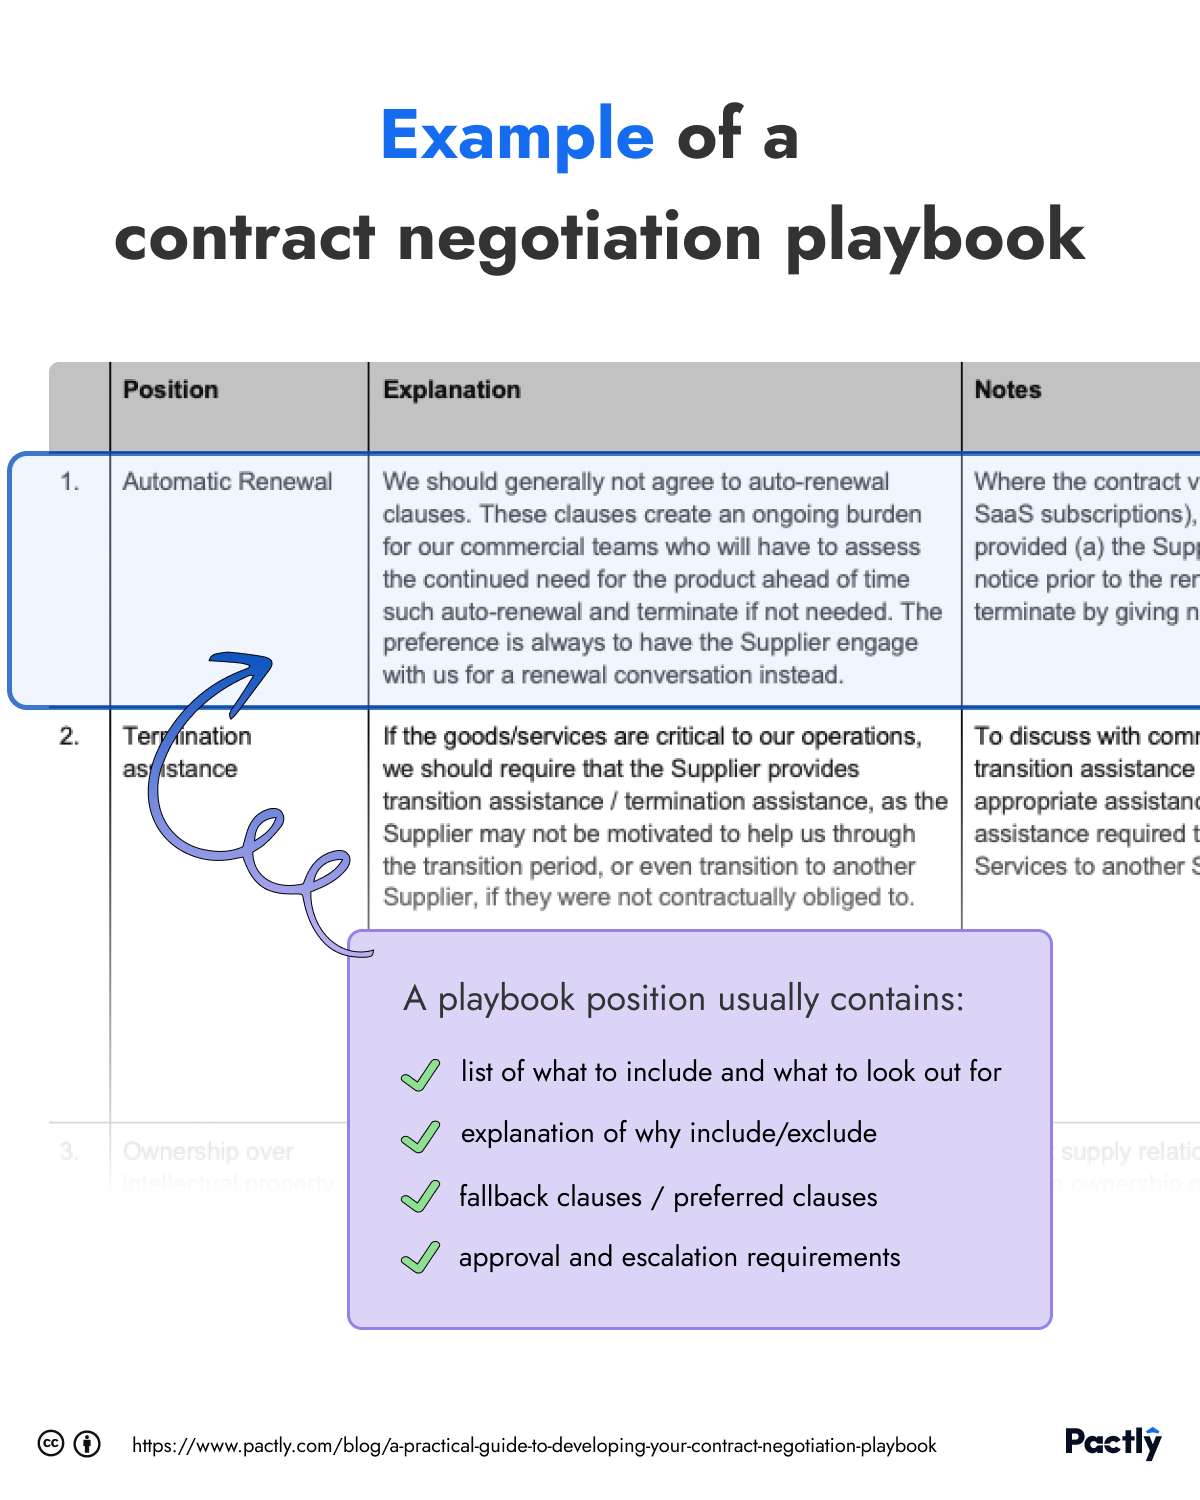 Image snippet of an example of a contract negotiation playbook